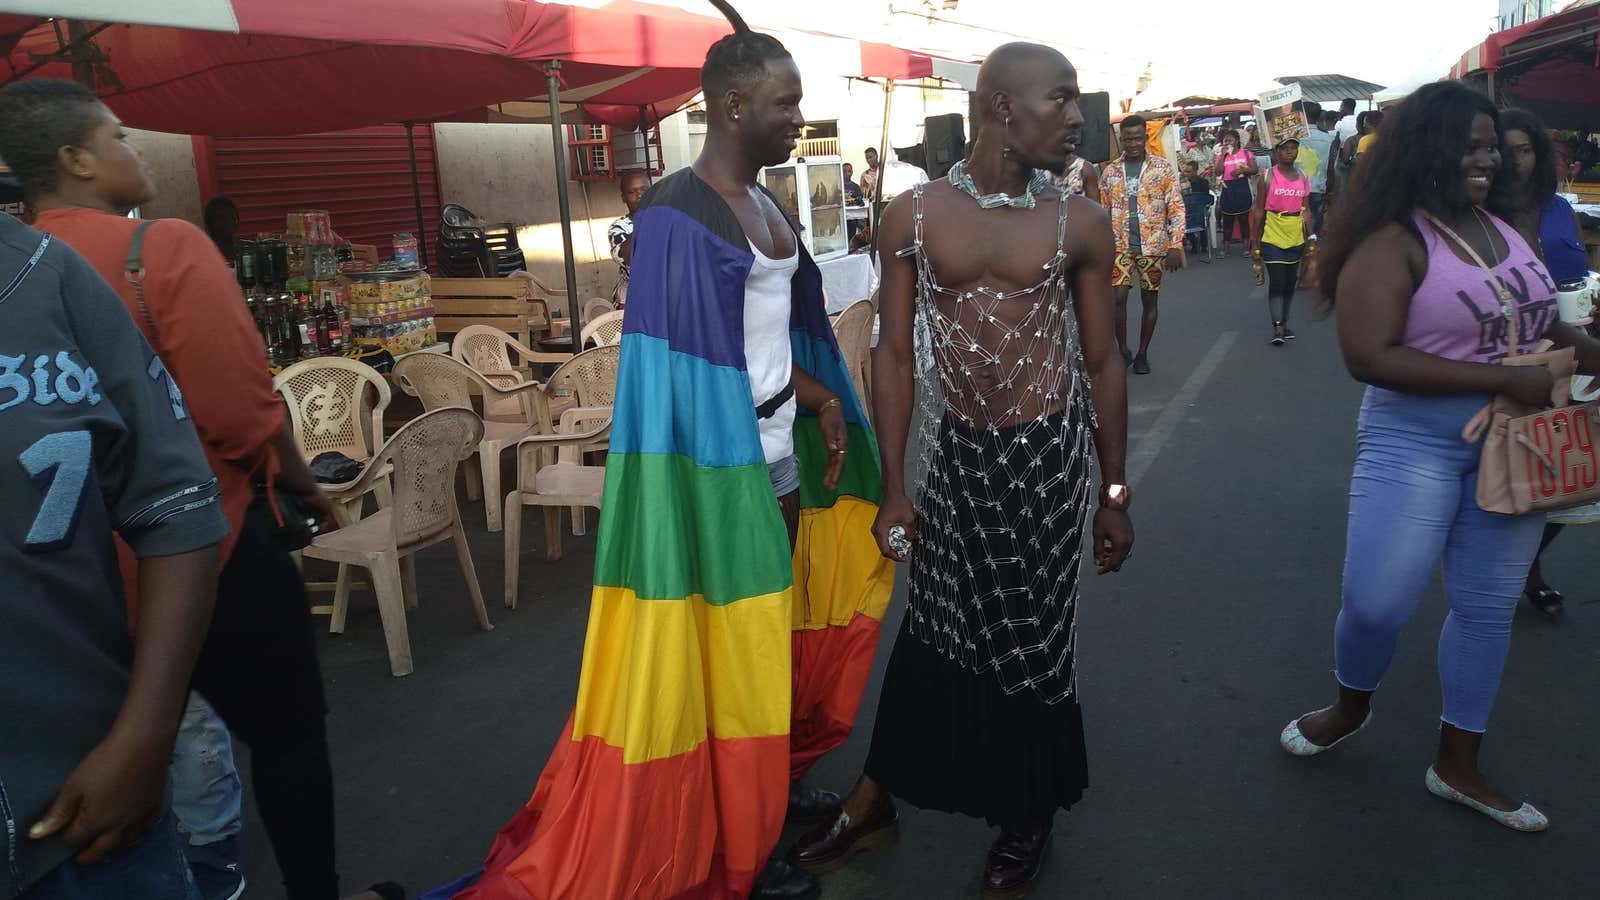 Being openly gay at Accra’s Chale Wote festival